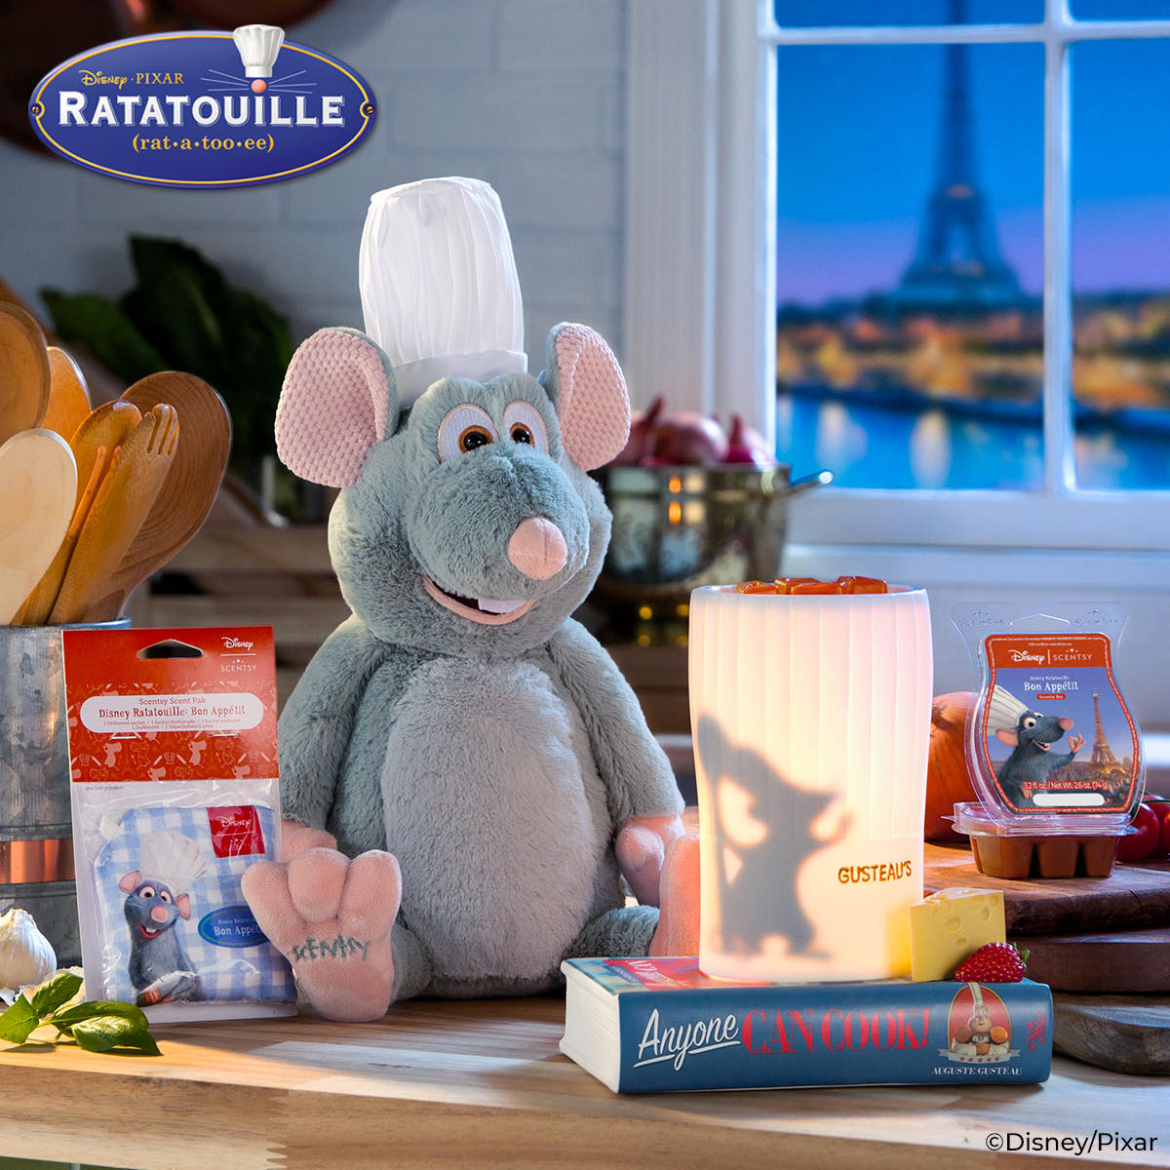 New Disney and Pixar Ratatouille Collection from Scentsy is a recipe for fun!